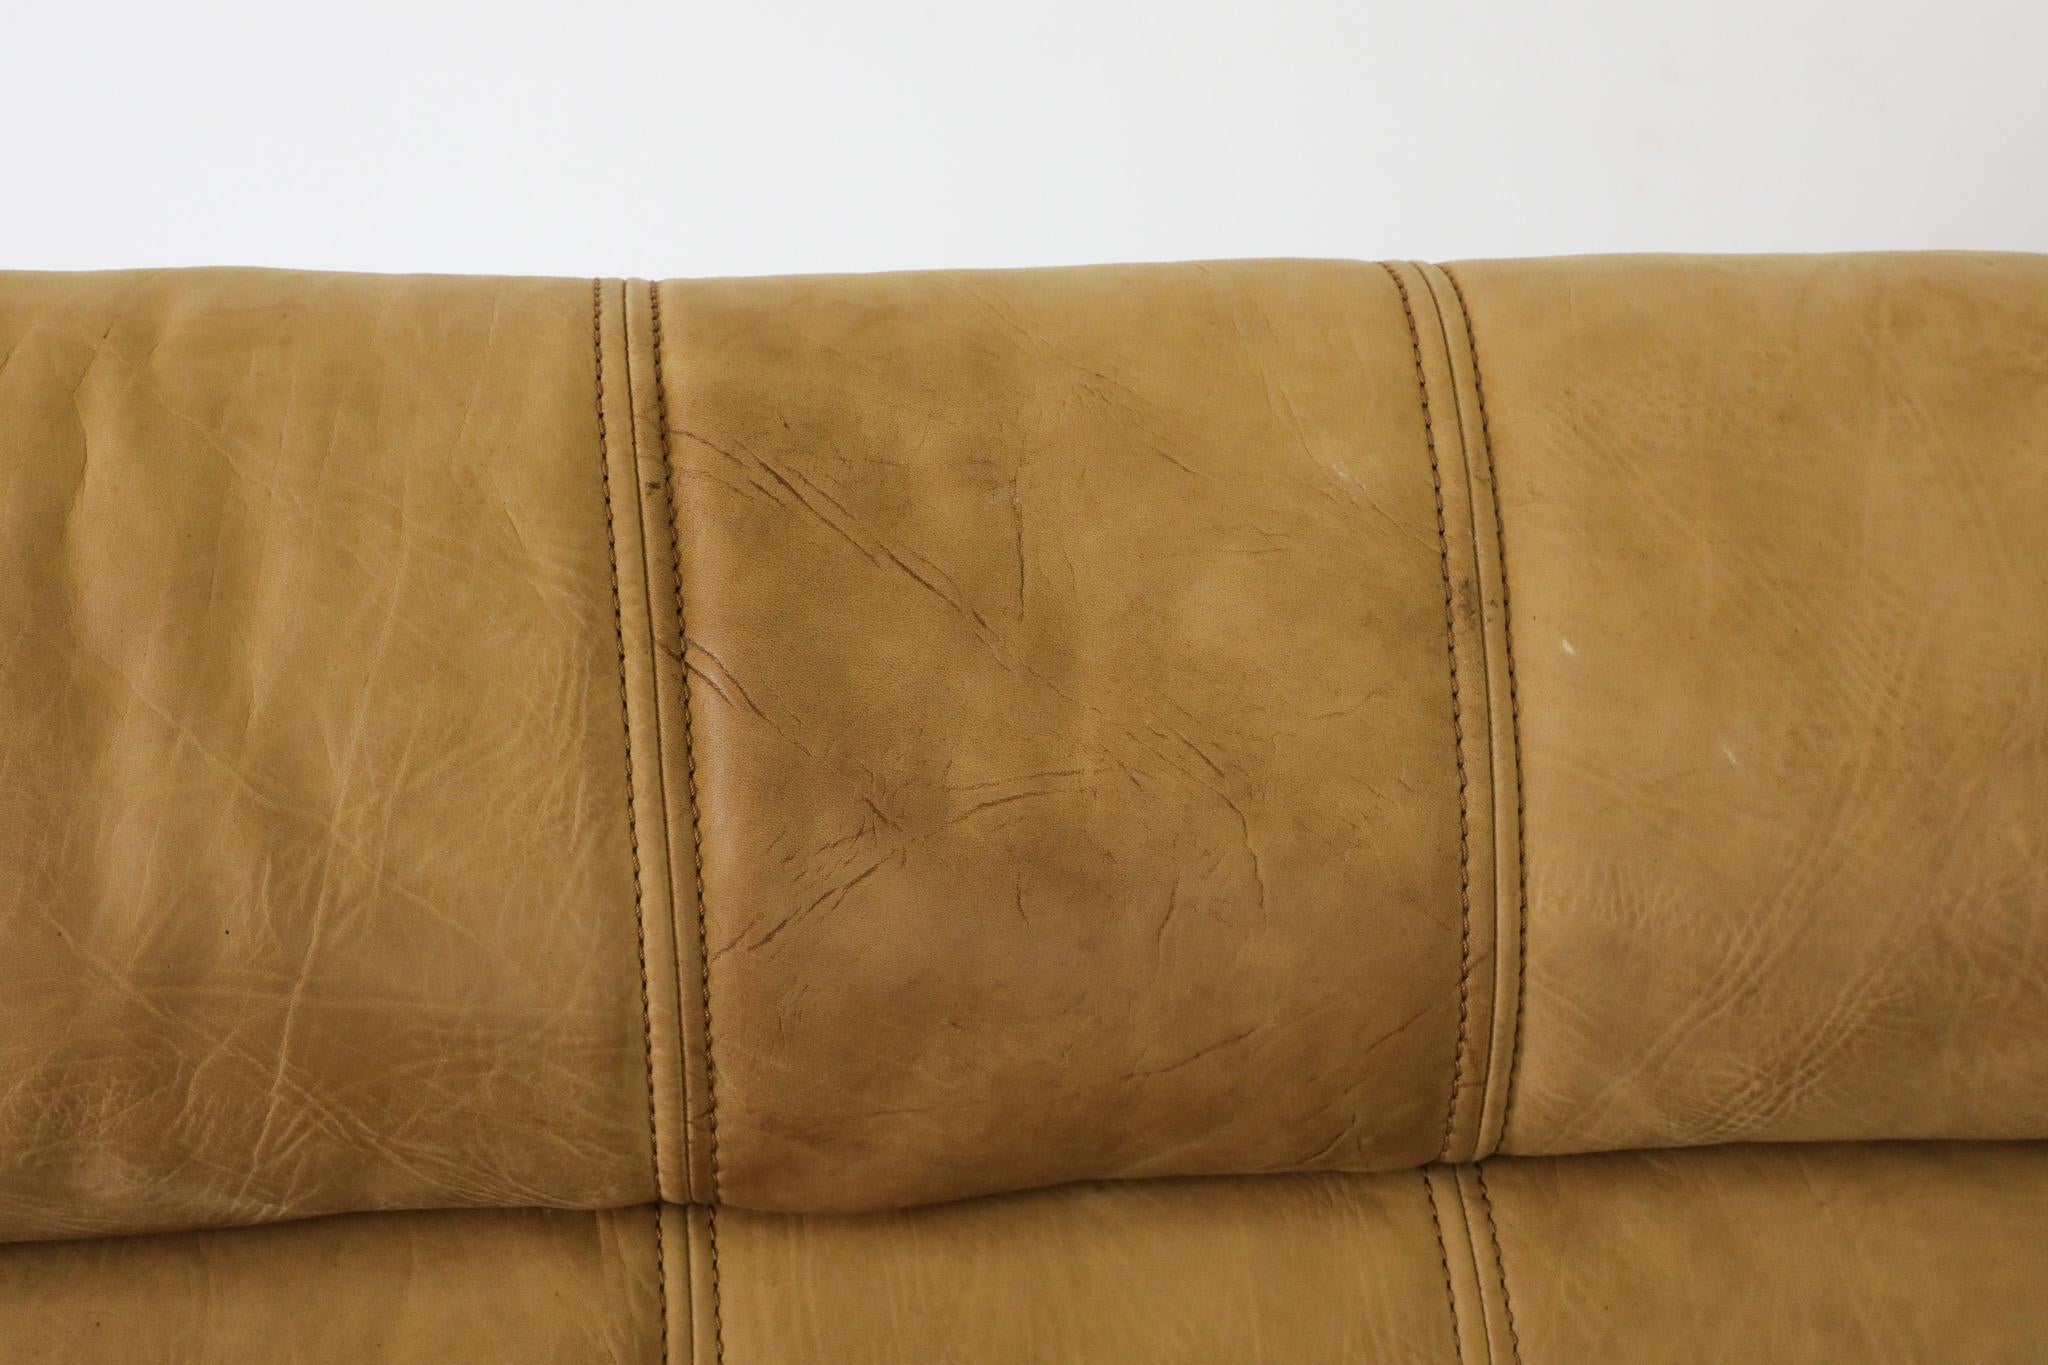 Rolf Benz Soft Form Buck Leather Loveseats, 1970s For Sale 8